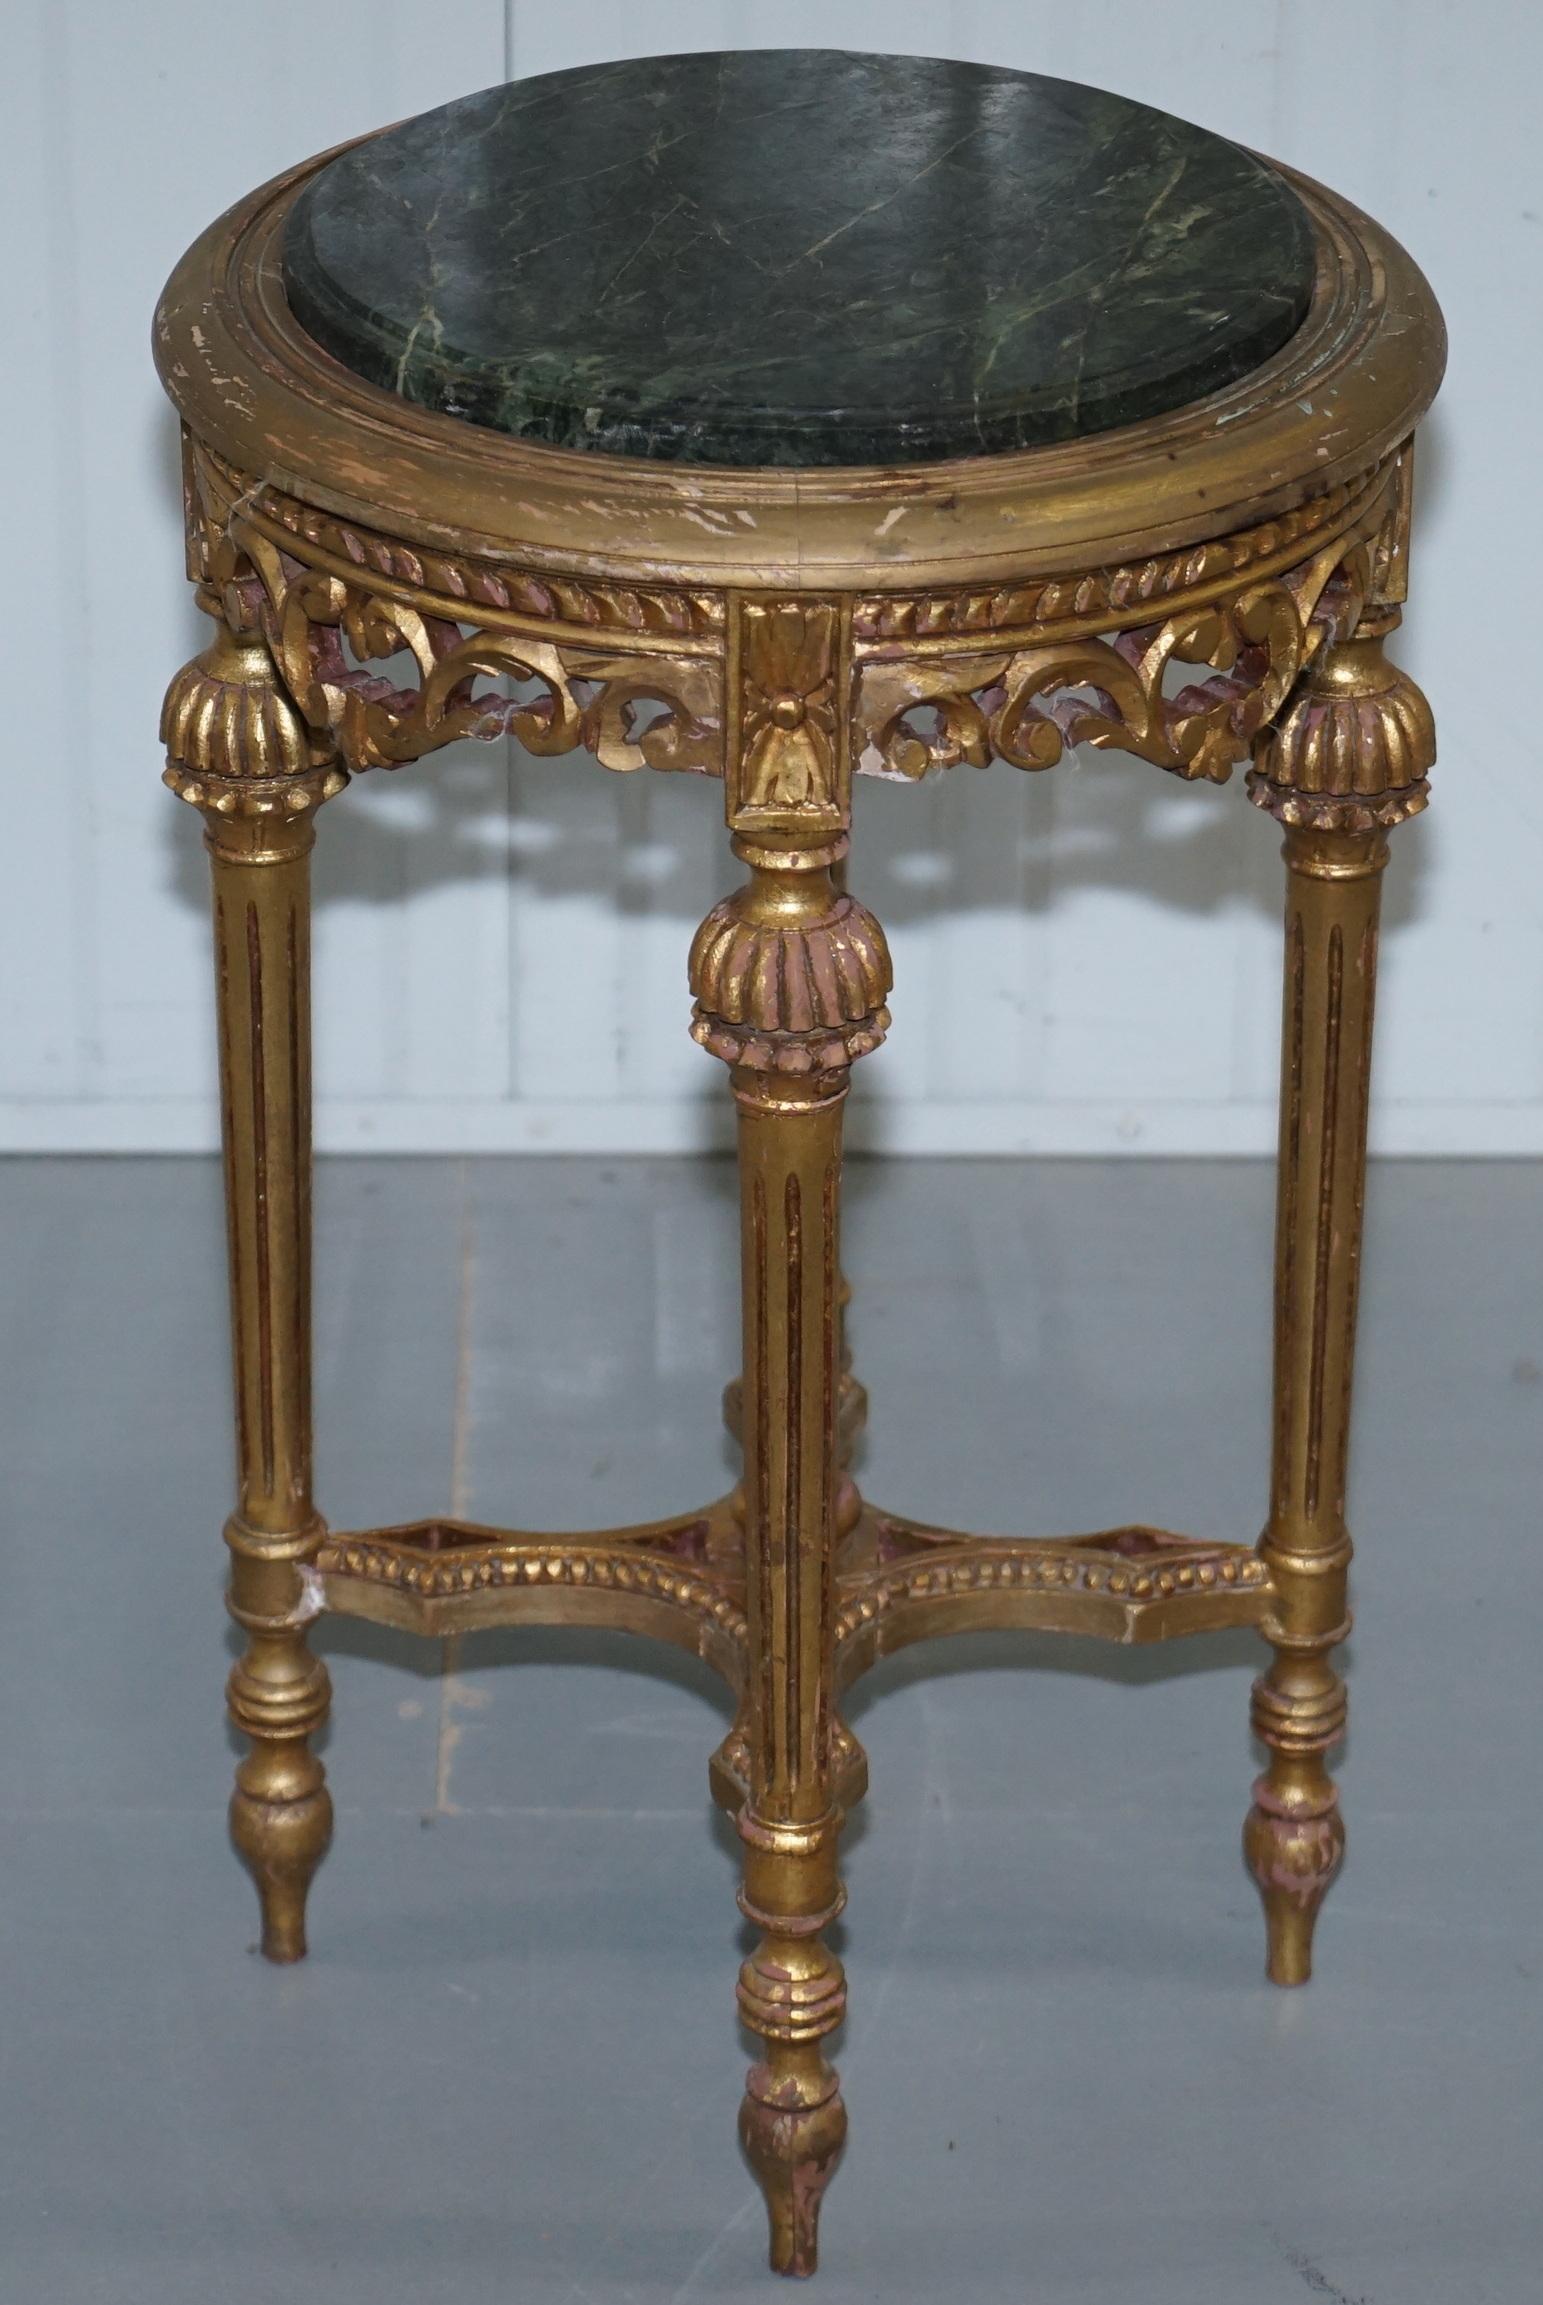 Hand-Crafted Lovely Green Marble Topped Giltwood French Rococo Stand Plants Busts Sculptures